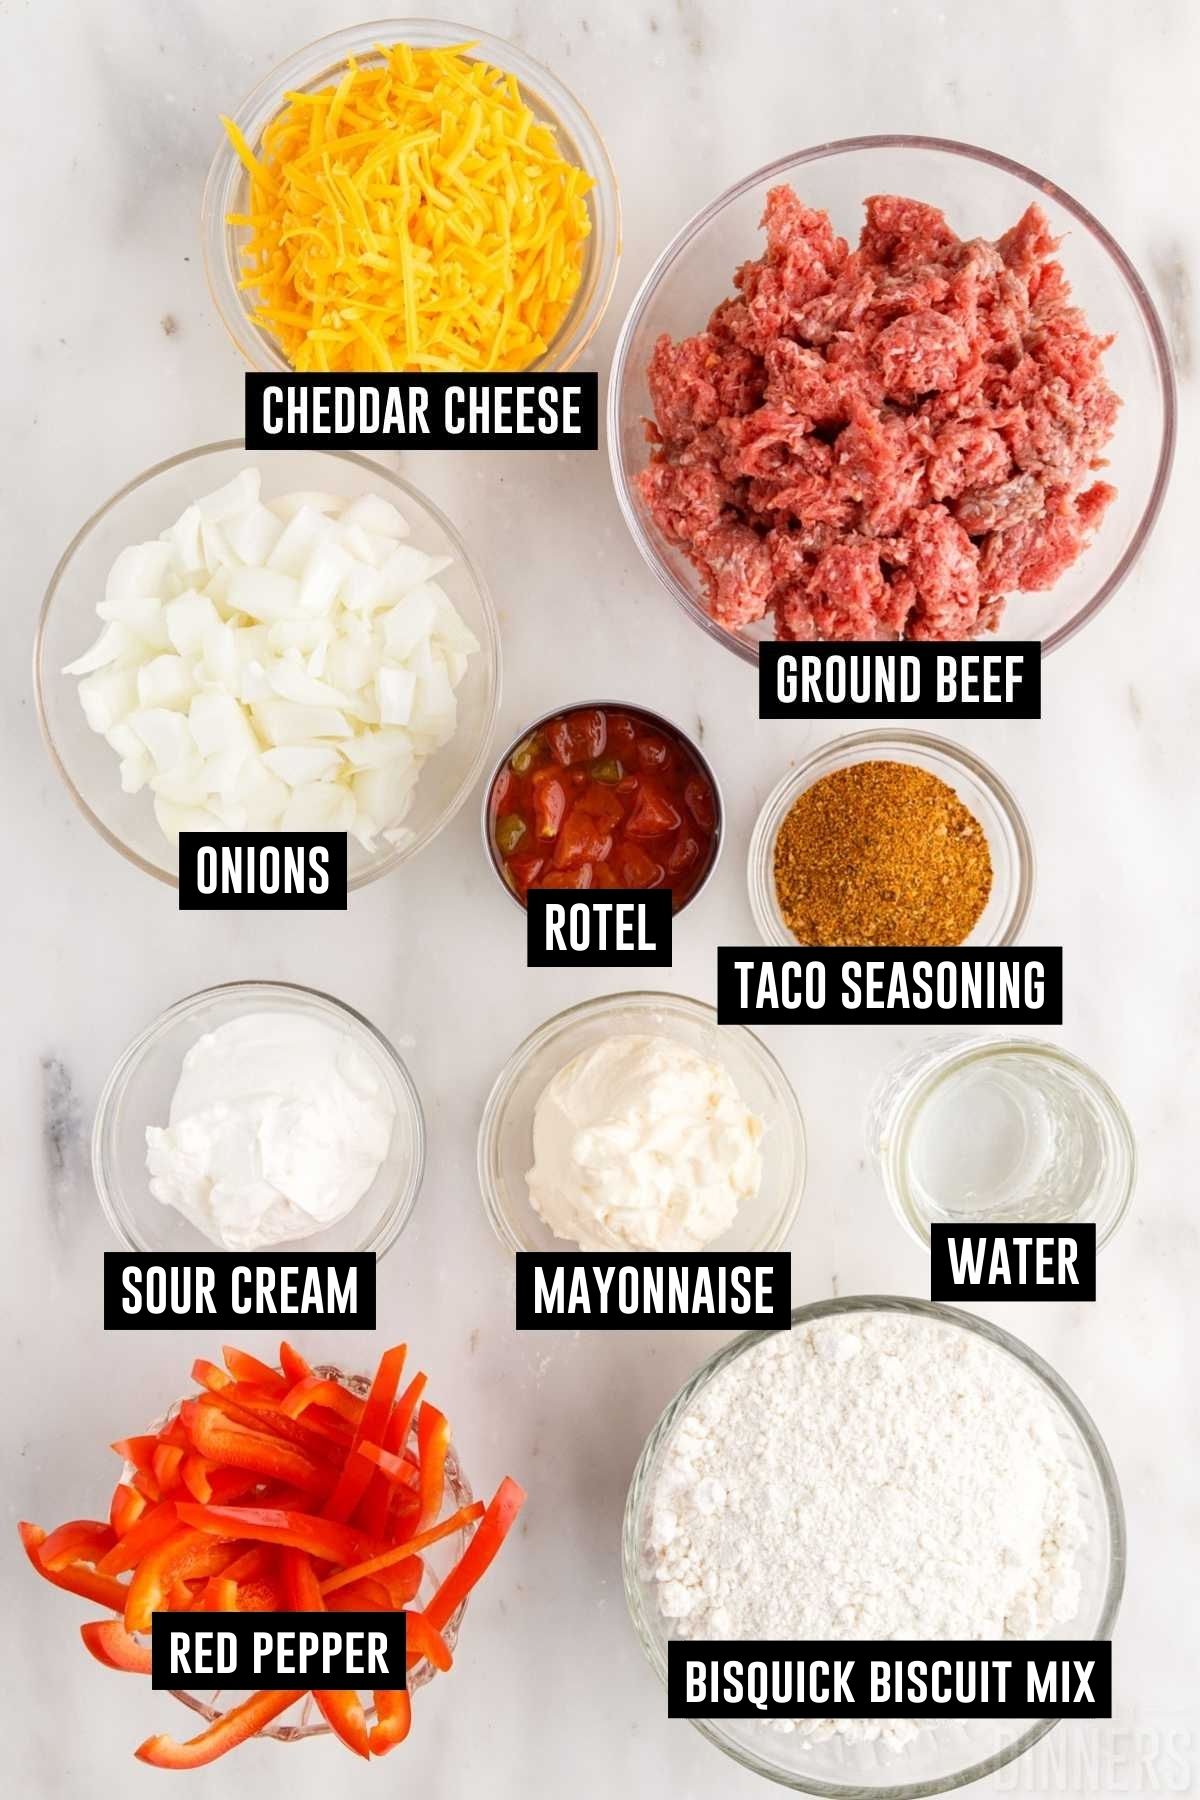 Ingredients for john wayne casserole in bowls including: ground beef, shredded cheese, chopped onions, rotel, taco seasoning, sour cream, mayonnaise, bell peppers and bisquick